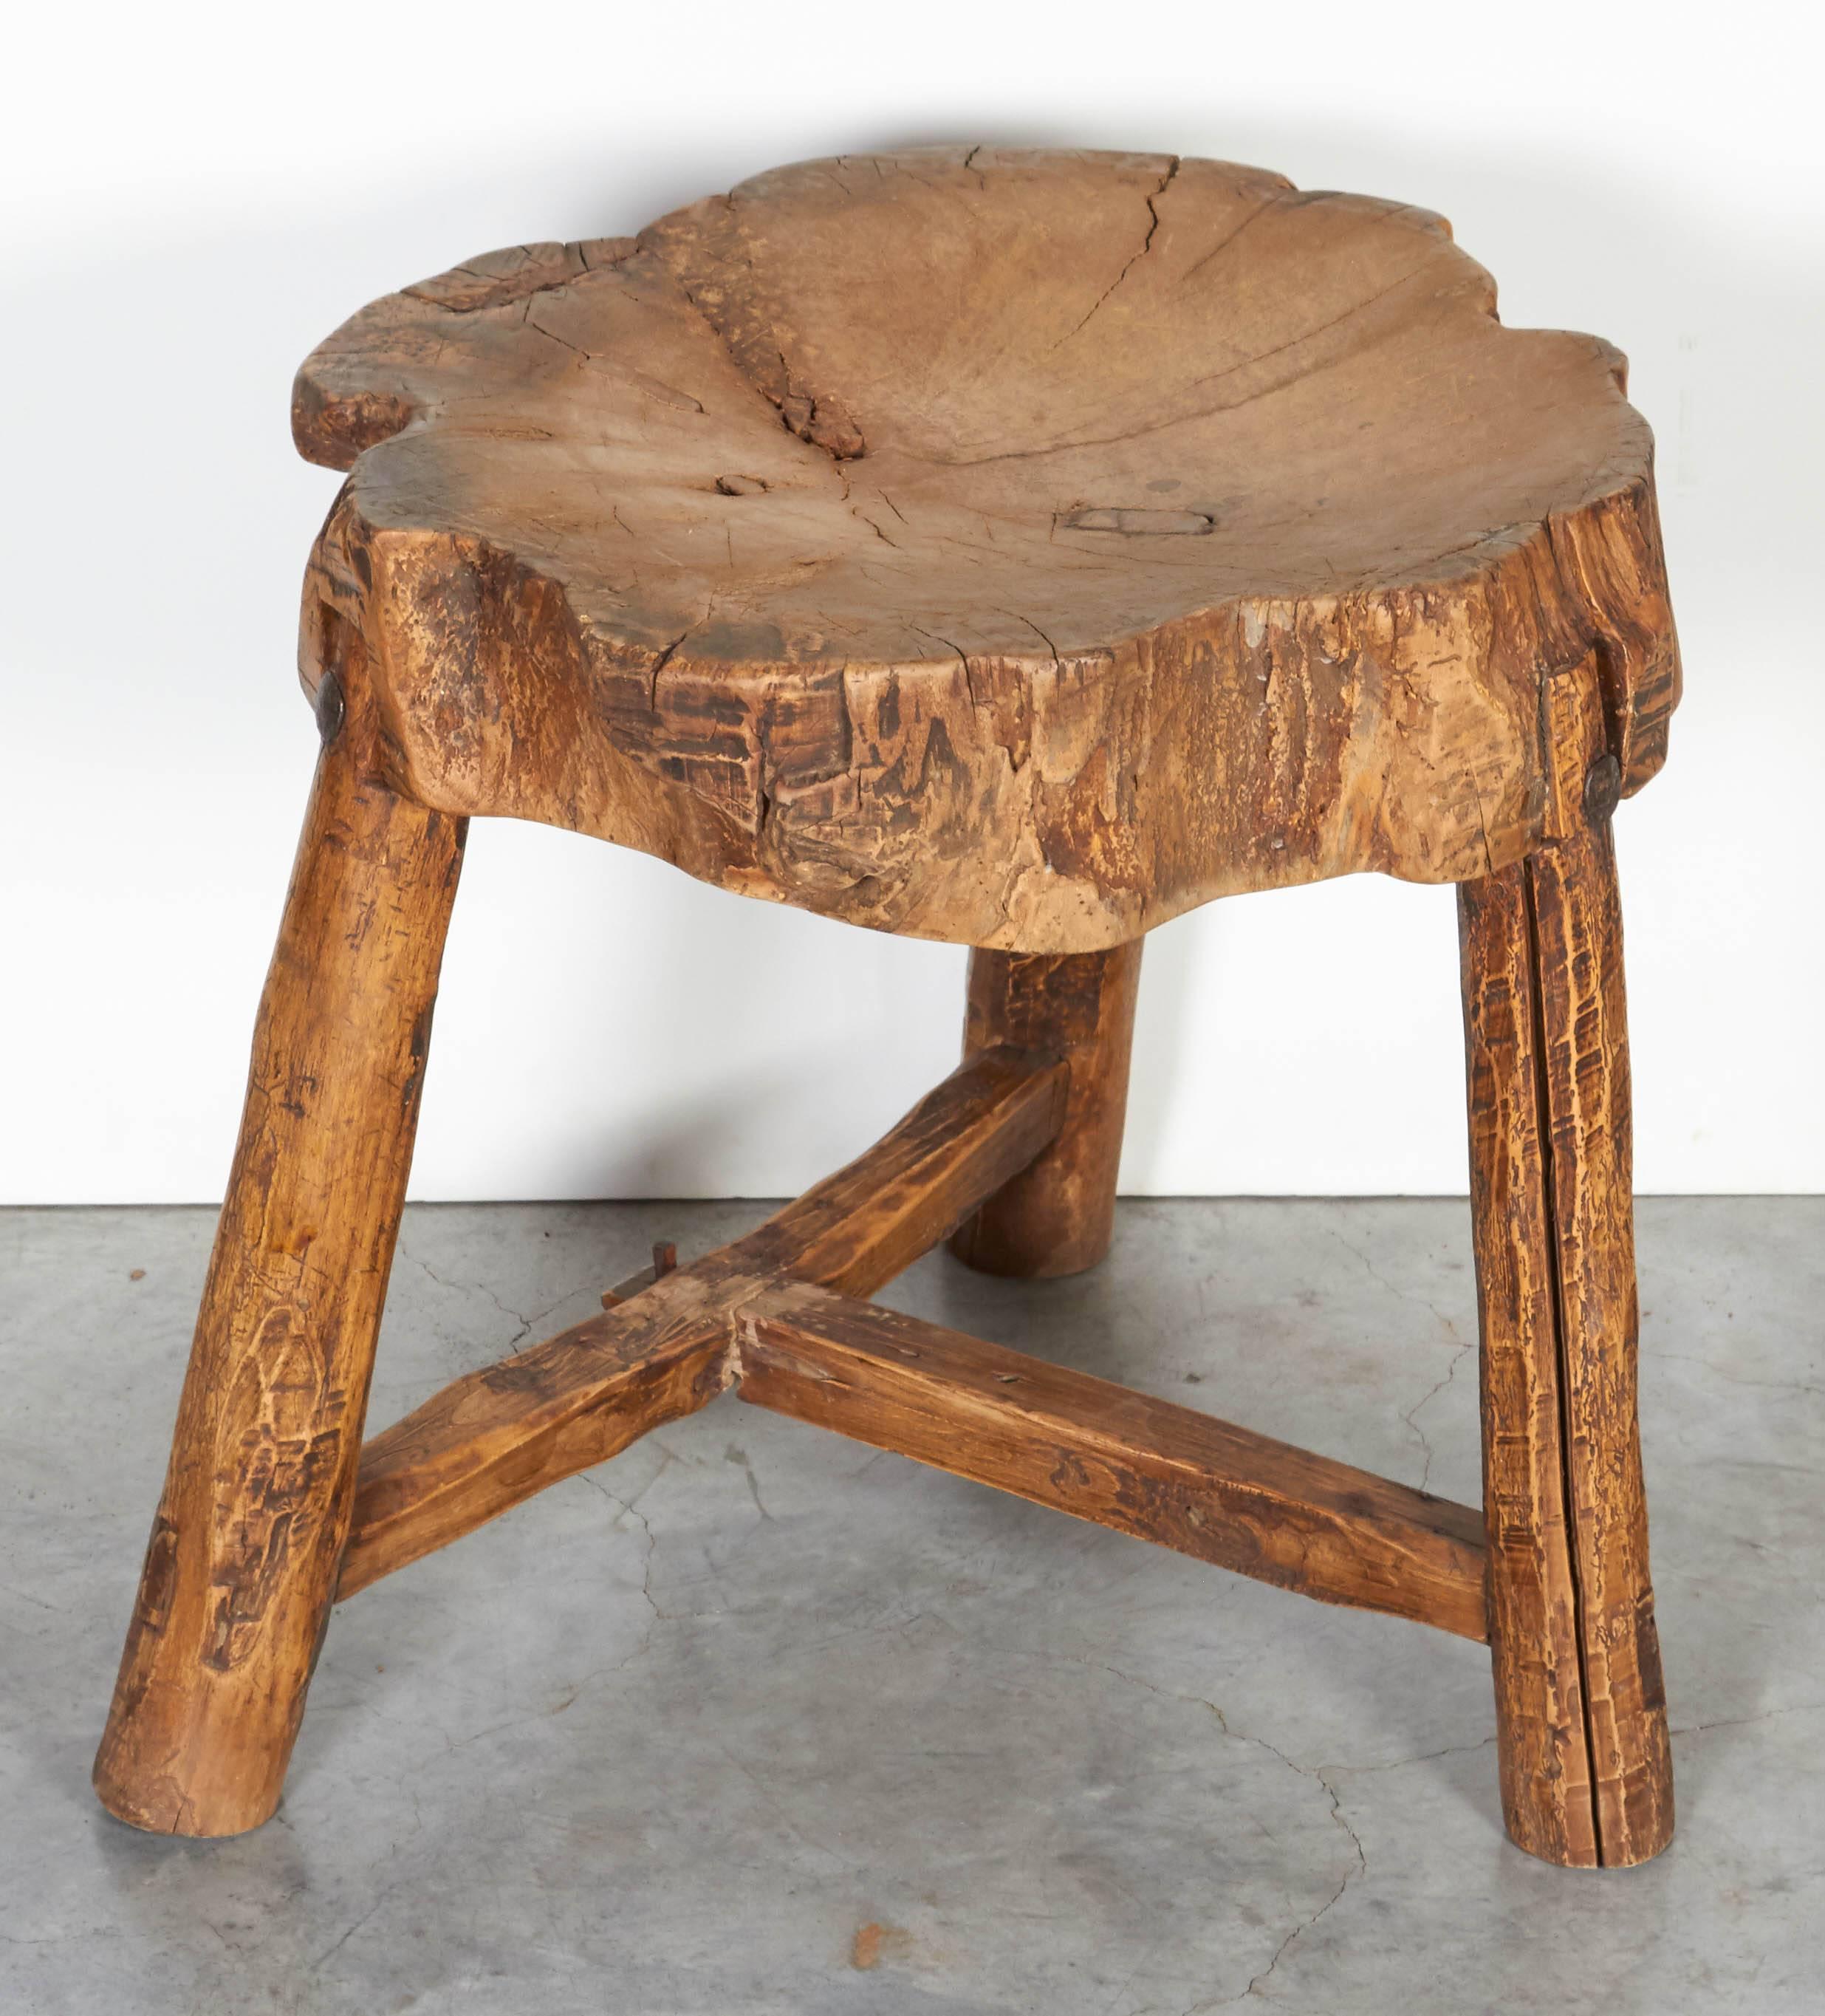 A Primitive, nicely shaped thick seated stool originally used as a butcher block in a rural province of China. The perfectly worn seat and legs add warmth and interest to any space. From Shandong Province, circa 1920.
a b h a y a 
S318.